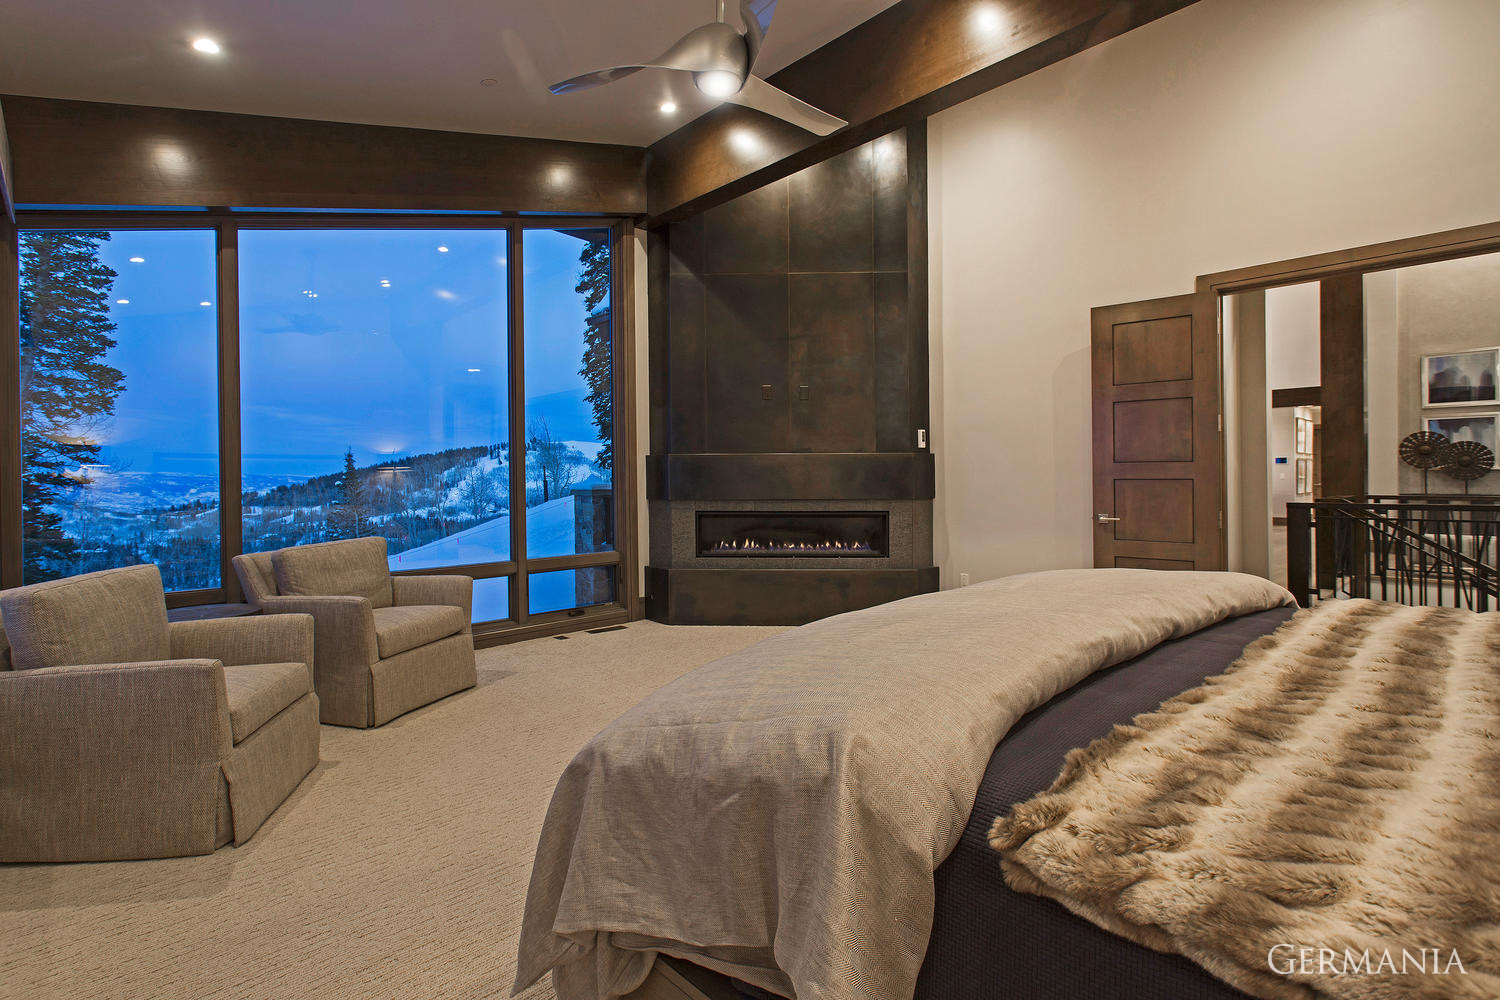 At Germania Construction, your luxury home master bedroom is a pivotal area in your custom home. Through the entire process, we ensure your expectations are exceeded. From fireplaces to beams, we work with you to deliver the best mountain home living experience.